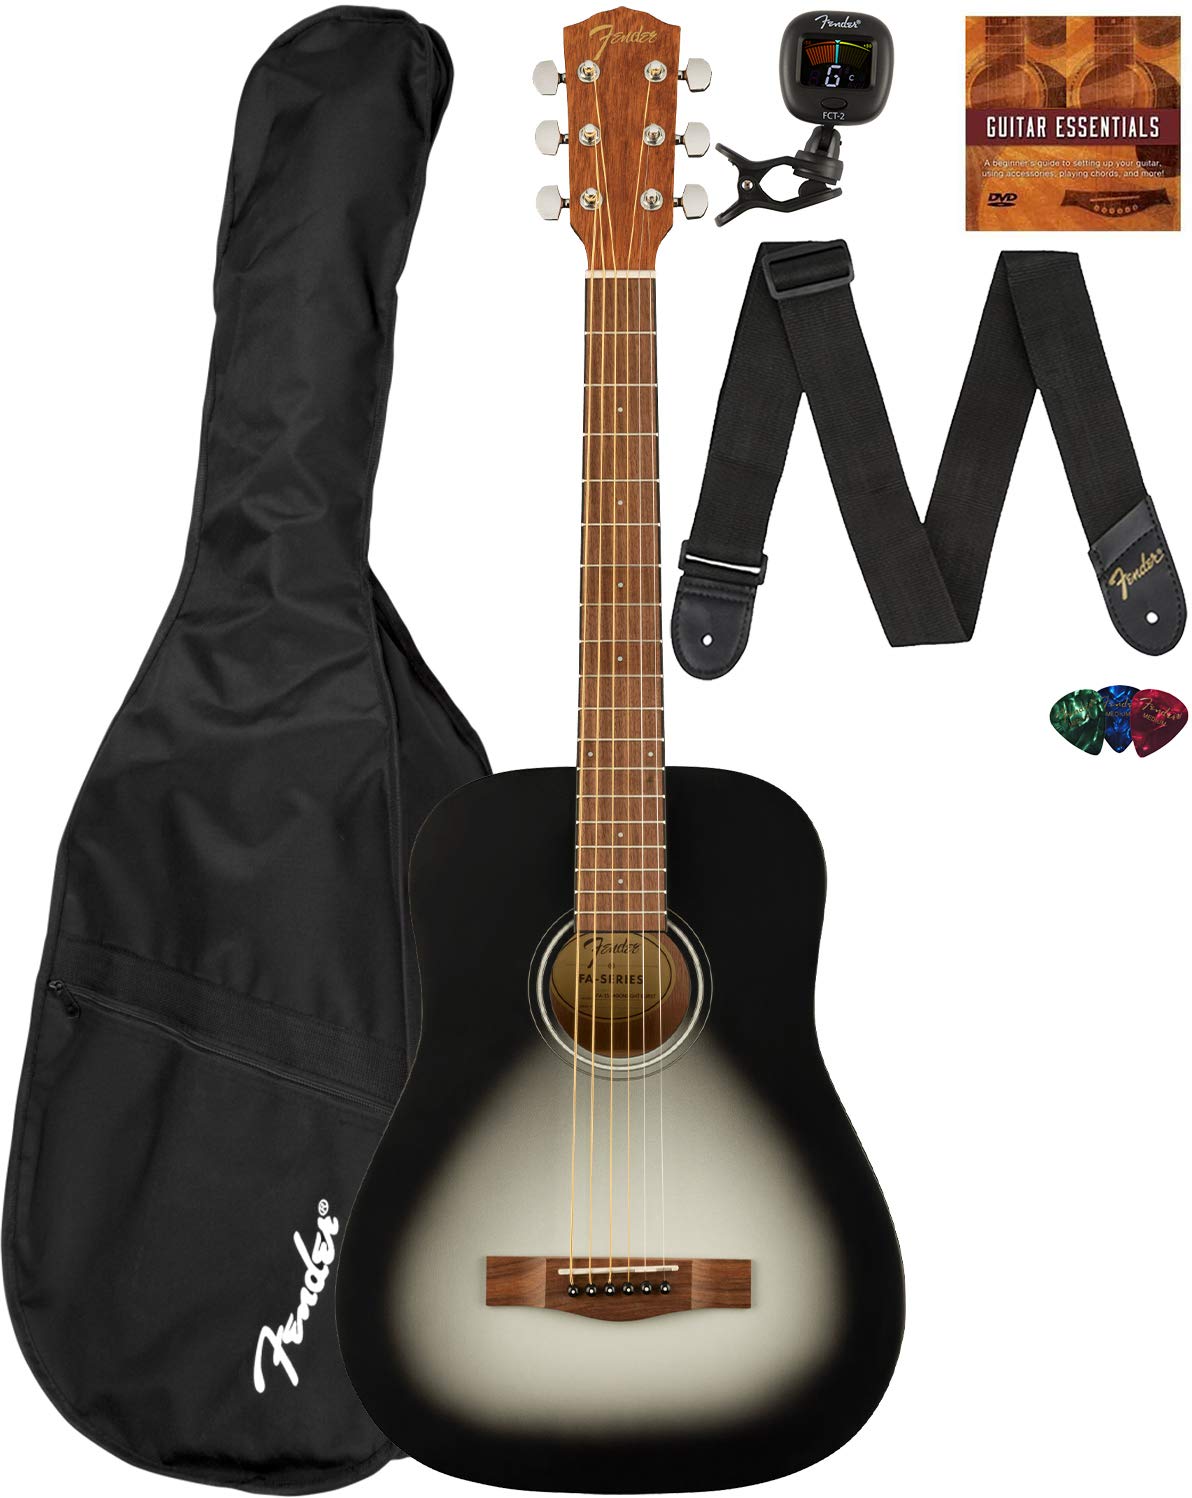 Fender Fa-15 34-Scale Kids Steel String Acoustic Guitar - Moonlight Burst Learn-To-Play Bundle With Gig Bag, Tuner, Strap, Picks